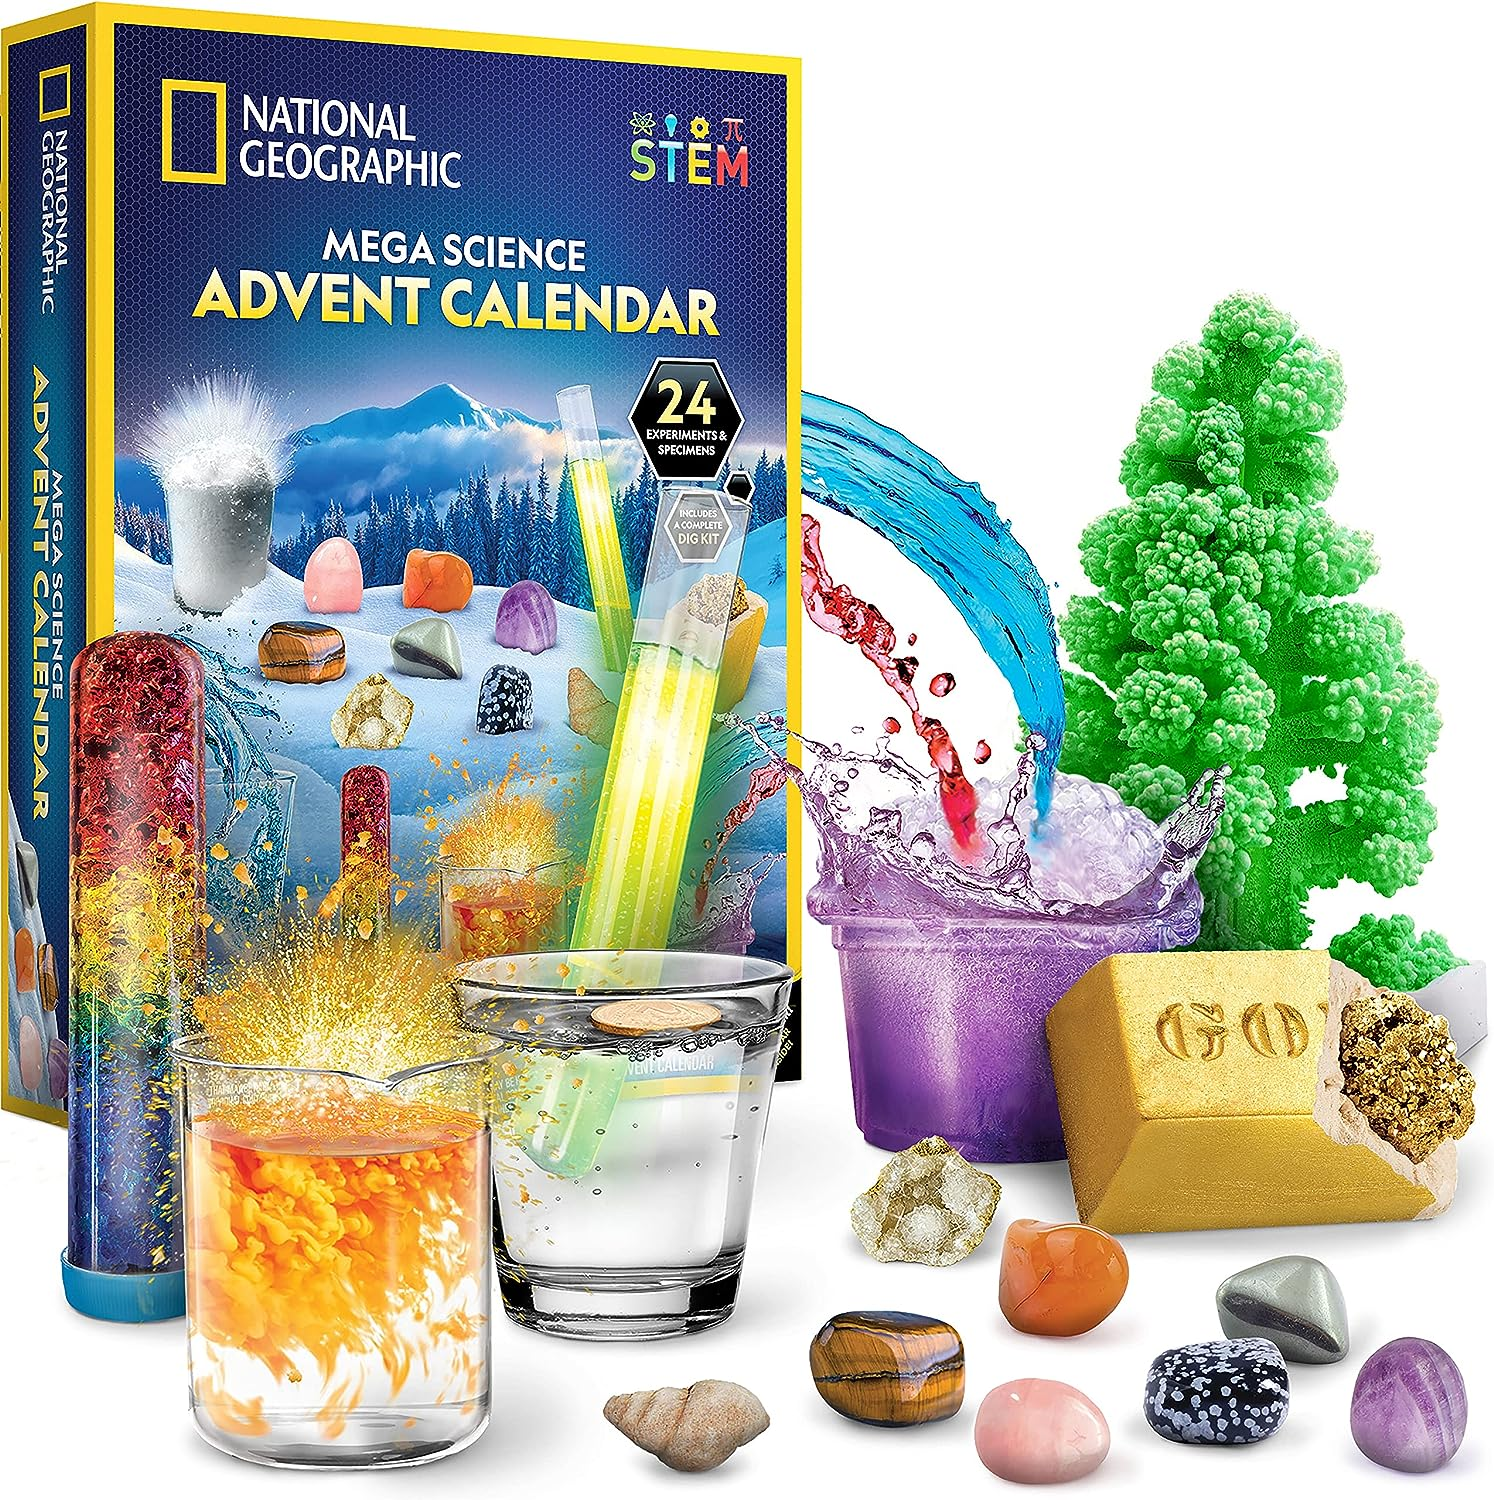 National Geographic Fool's Gold Mini Dig Kit 